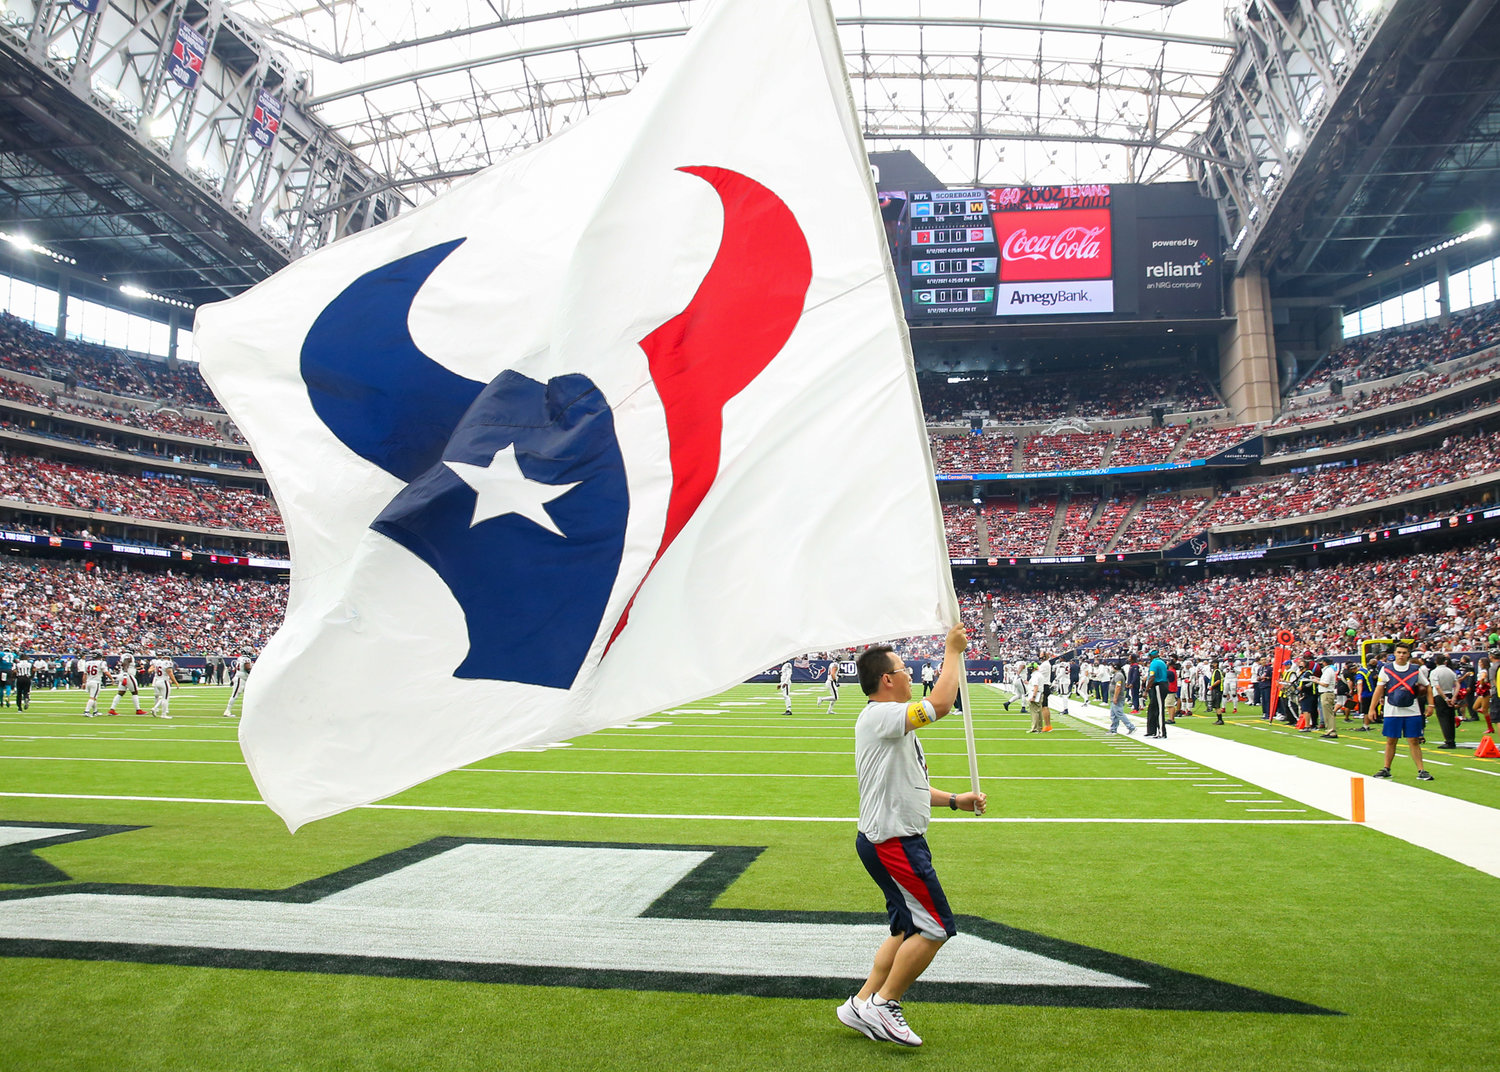 A Houston Texans flag runner after a Texans touchdown during the first half of an NFL game between the Houston Texans and the Jacksonville Jaguars on September 12, 2021 in Houston, Texas.